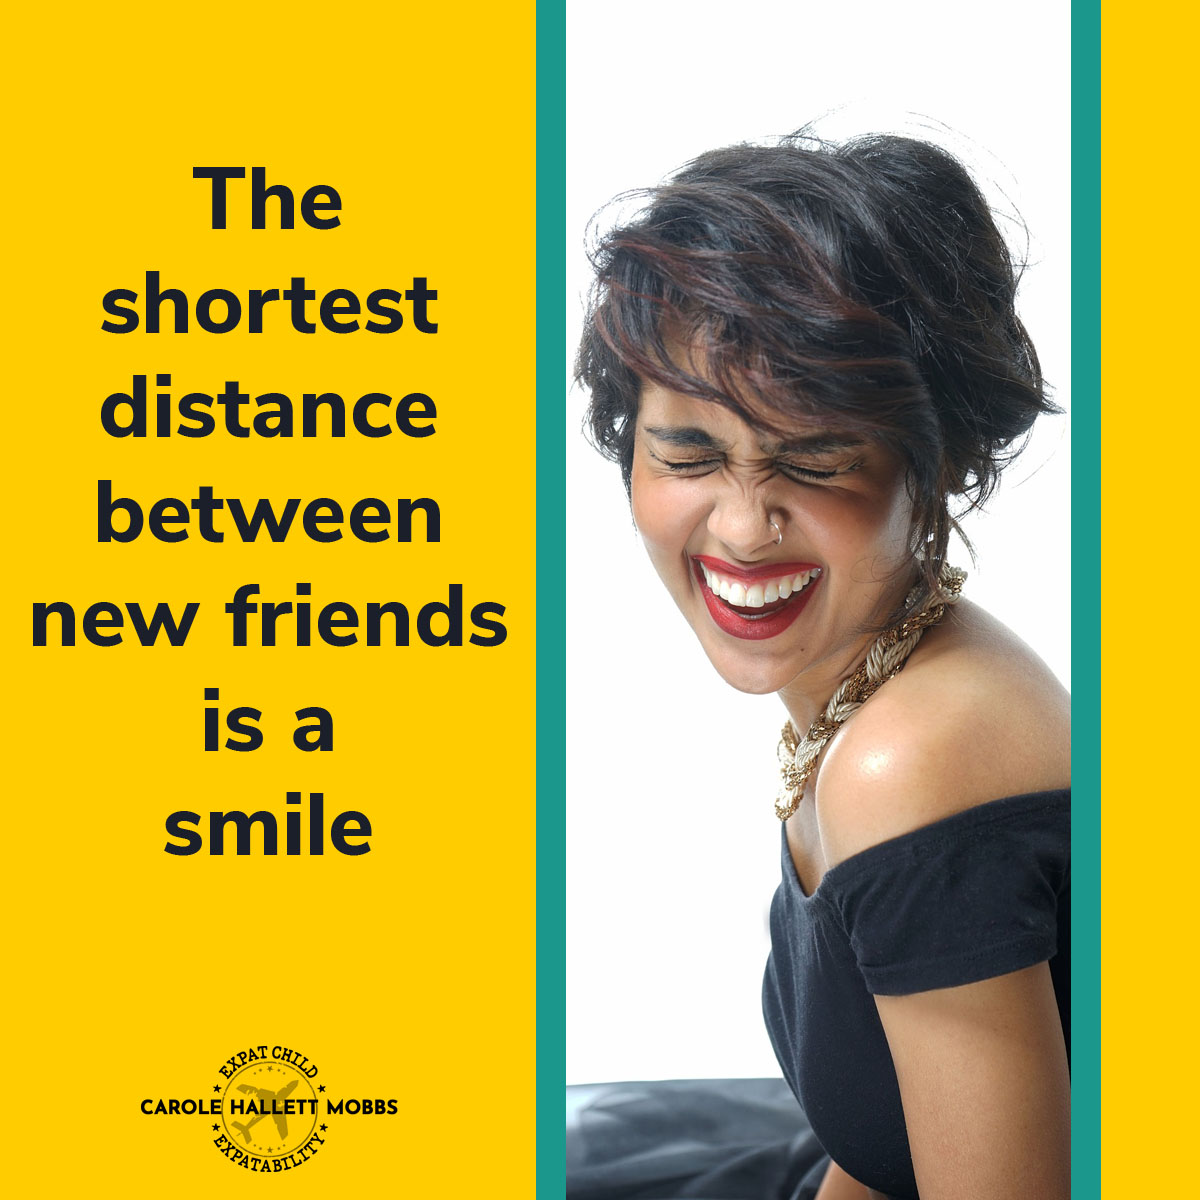 “The shortest distance between new friends is a smile.” ~ Unknown #expat #expatlife